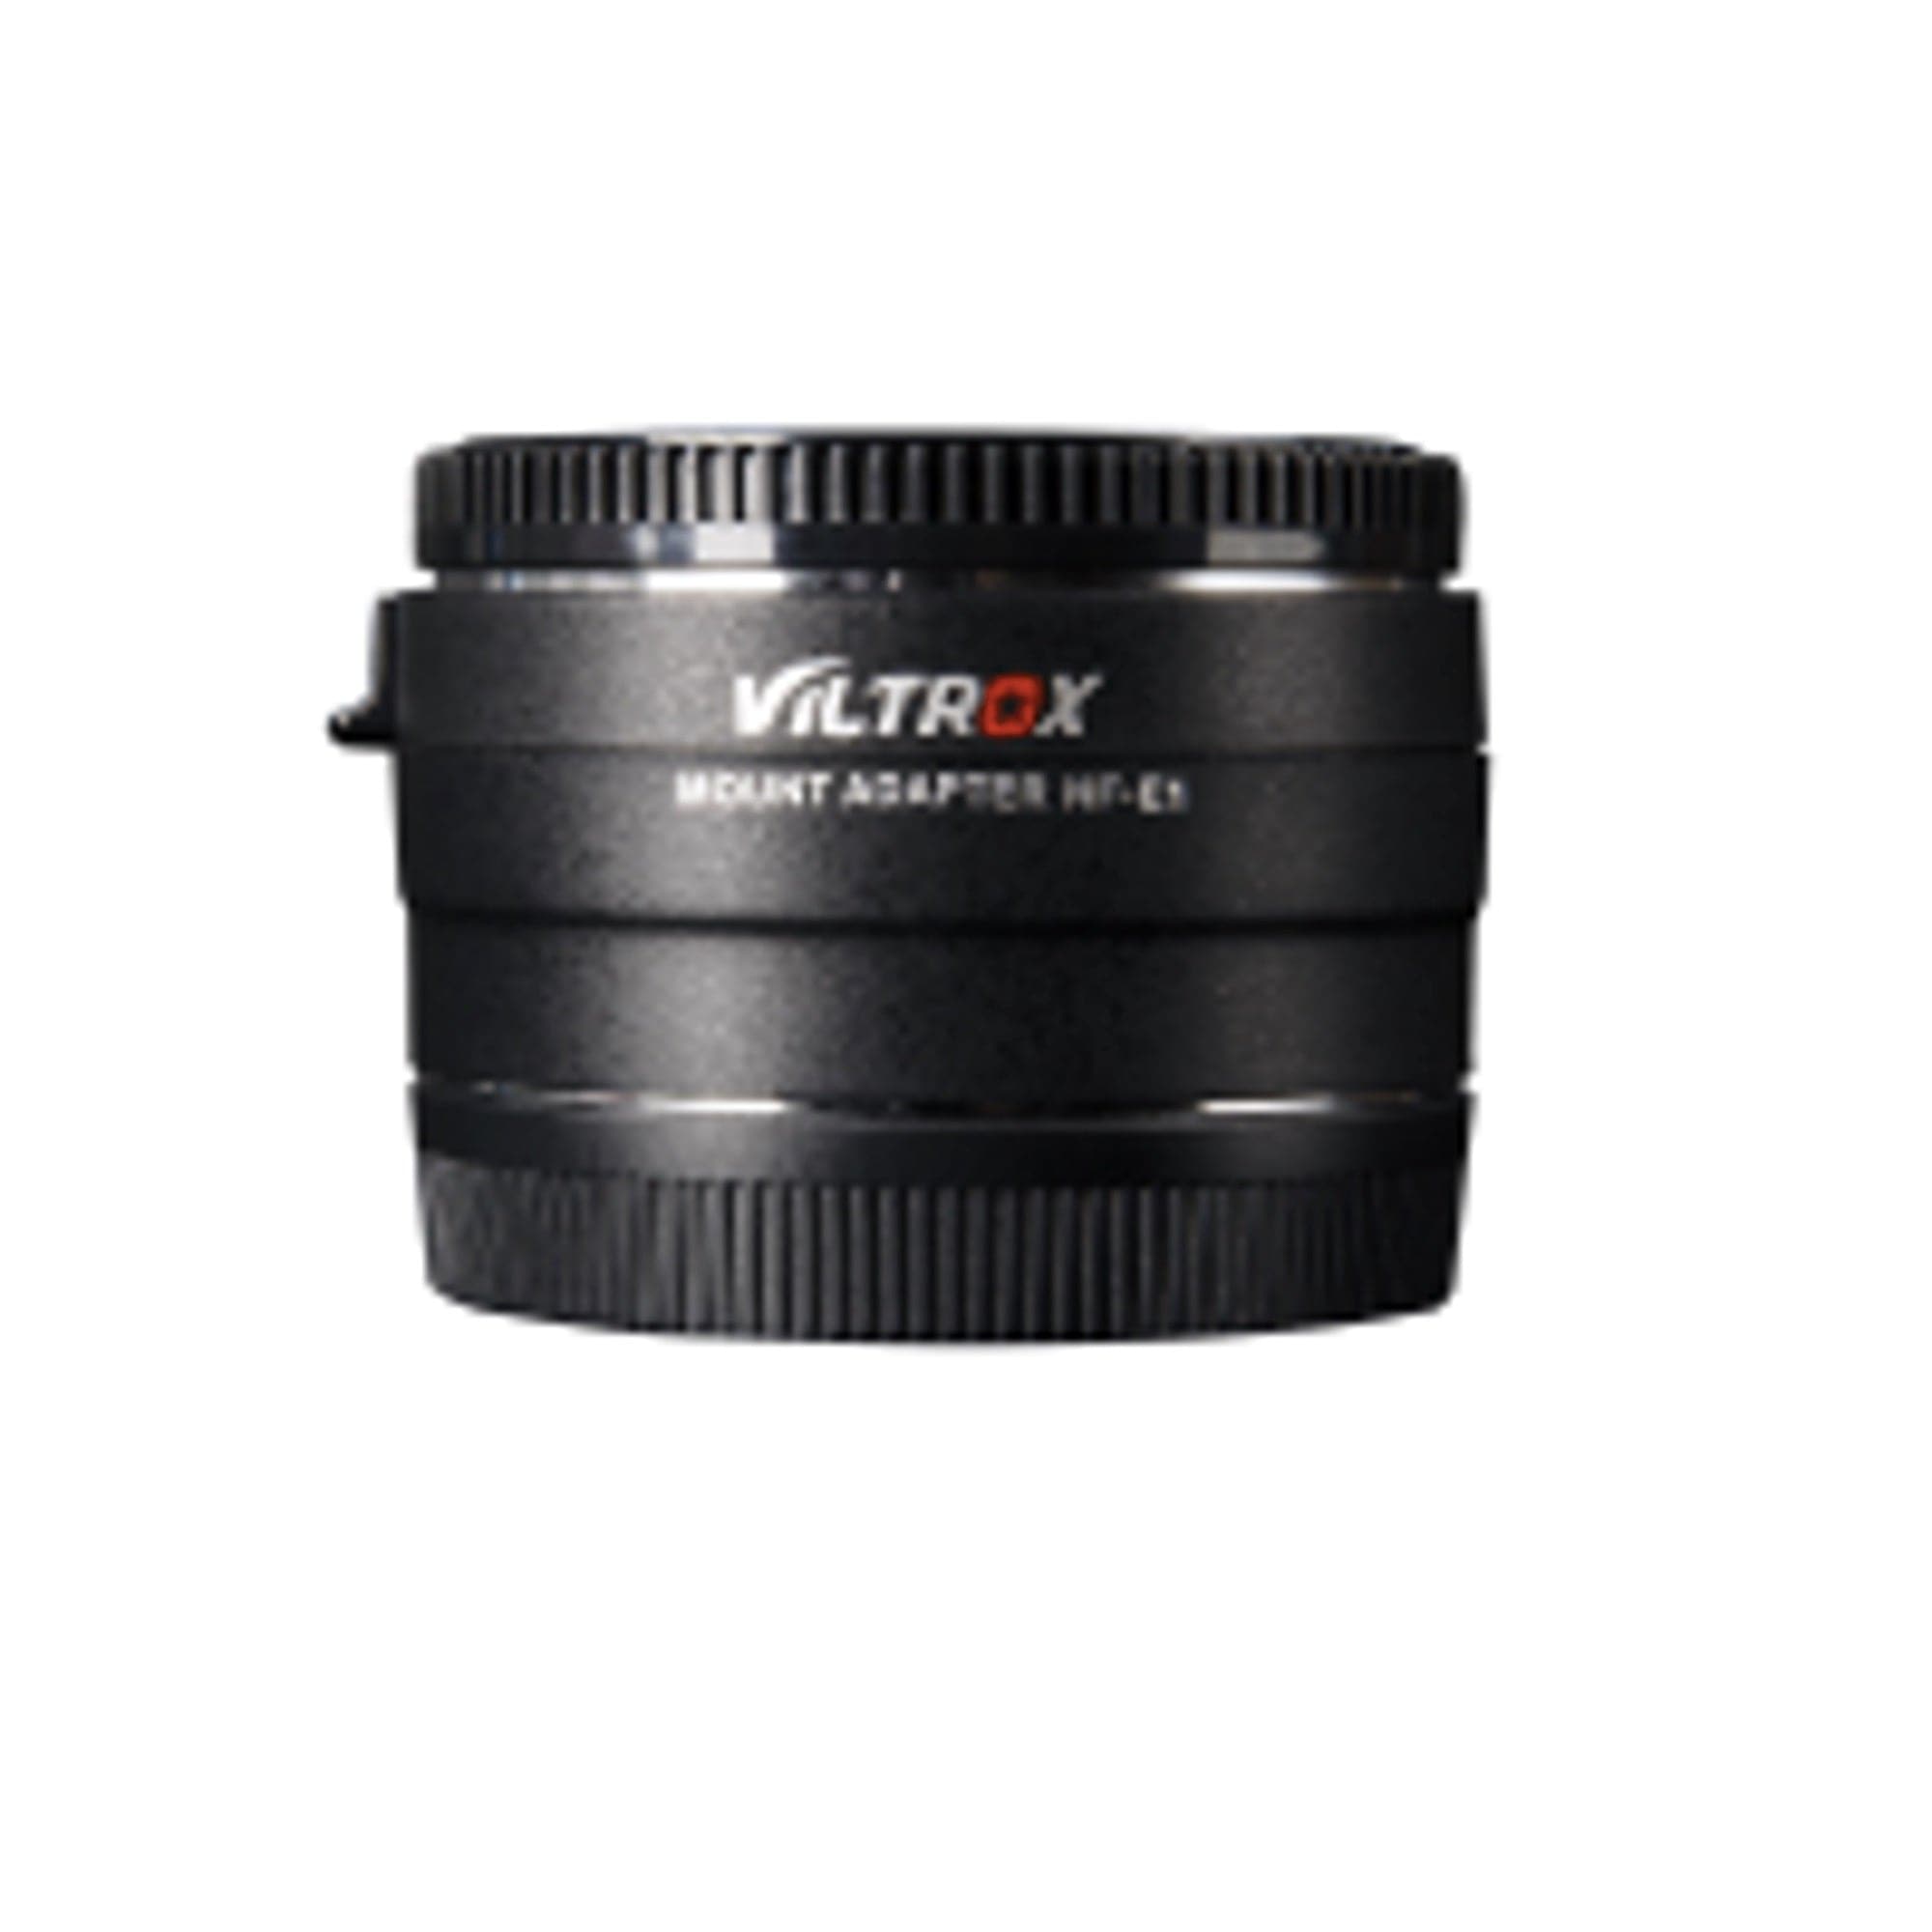 Viltrox NF-E1 AF Electronic Lens Mount Adapter for Nikon F Lens to Sony E Mount